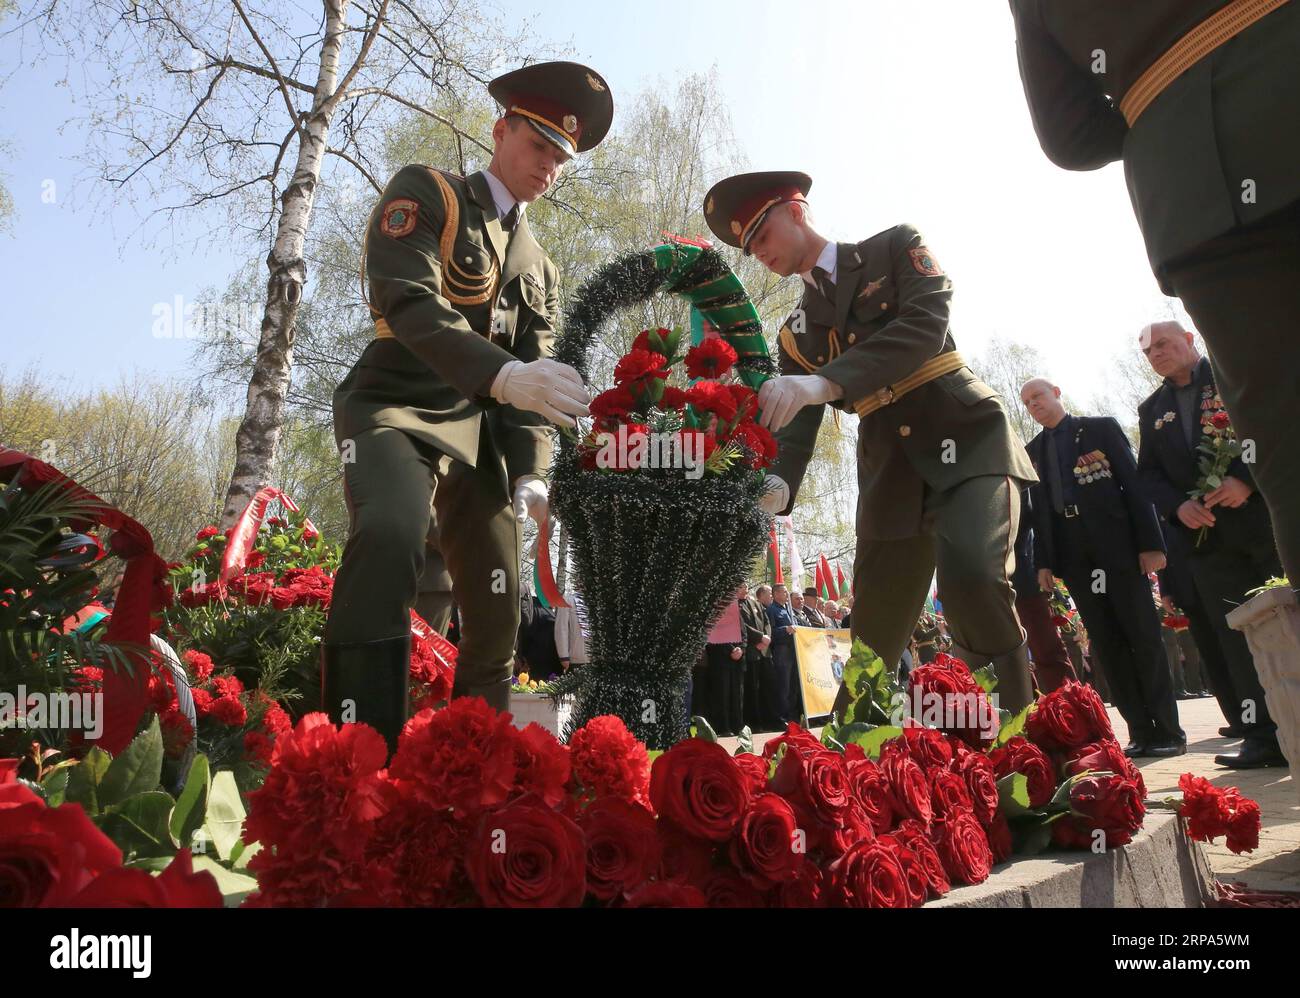 (190426) -- MINSK, April 26, 2019 (Xinhua) -- Soldiers lay flowers to commemorate the victims of the Chernobyl disaster in Minsk, Belarus, April 26, 2019. The Chernobyl nuclear power plant, some 110 km north of the Ukrainian capital Kiev, witnessed one of the worst nuclear accidents in human history on April 26, 1986, when a series of explosions ripped through the No.4 reactor, spreading radiation across Ukraine, Belarus, Russia and other European countries. (Xinhua/Efim Mazurevich) BELARUS-MINSK-CHERNOBYL DISASTER-33TH ANNIVERSARY PUBLICATIONxNOTxINxCHN Stock Photo